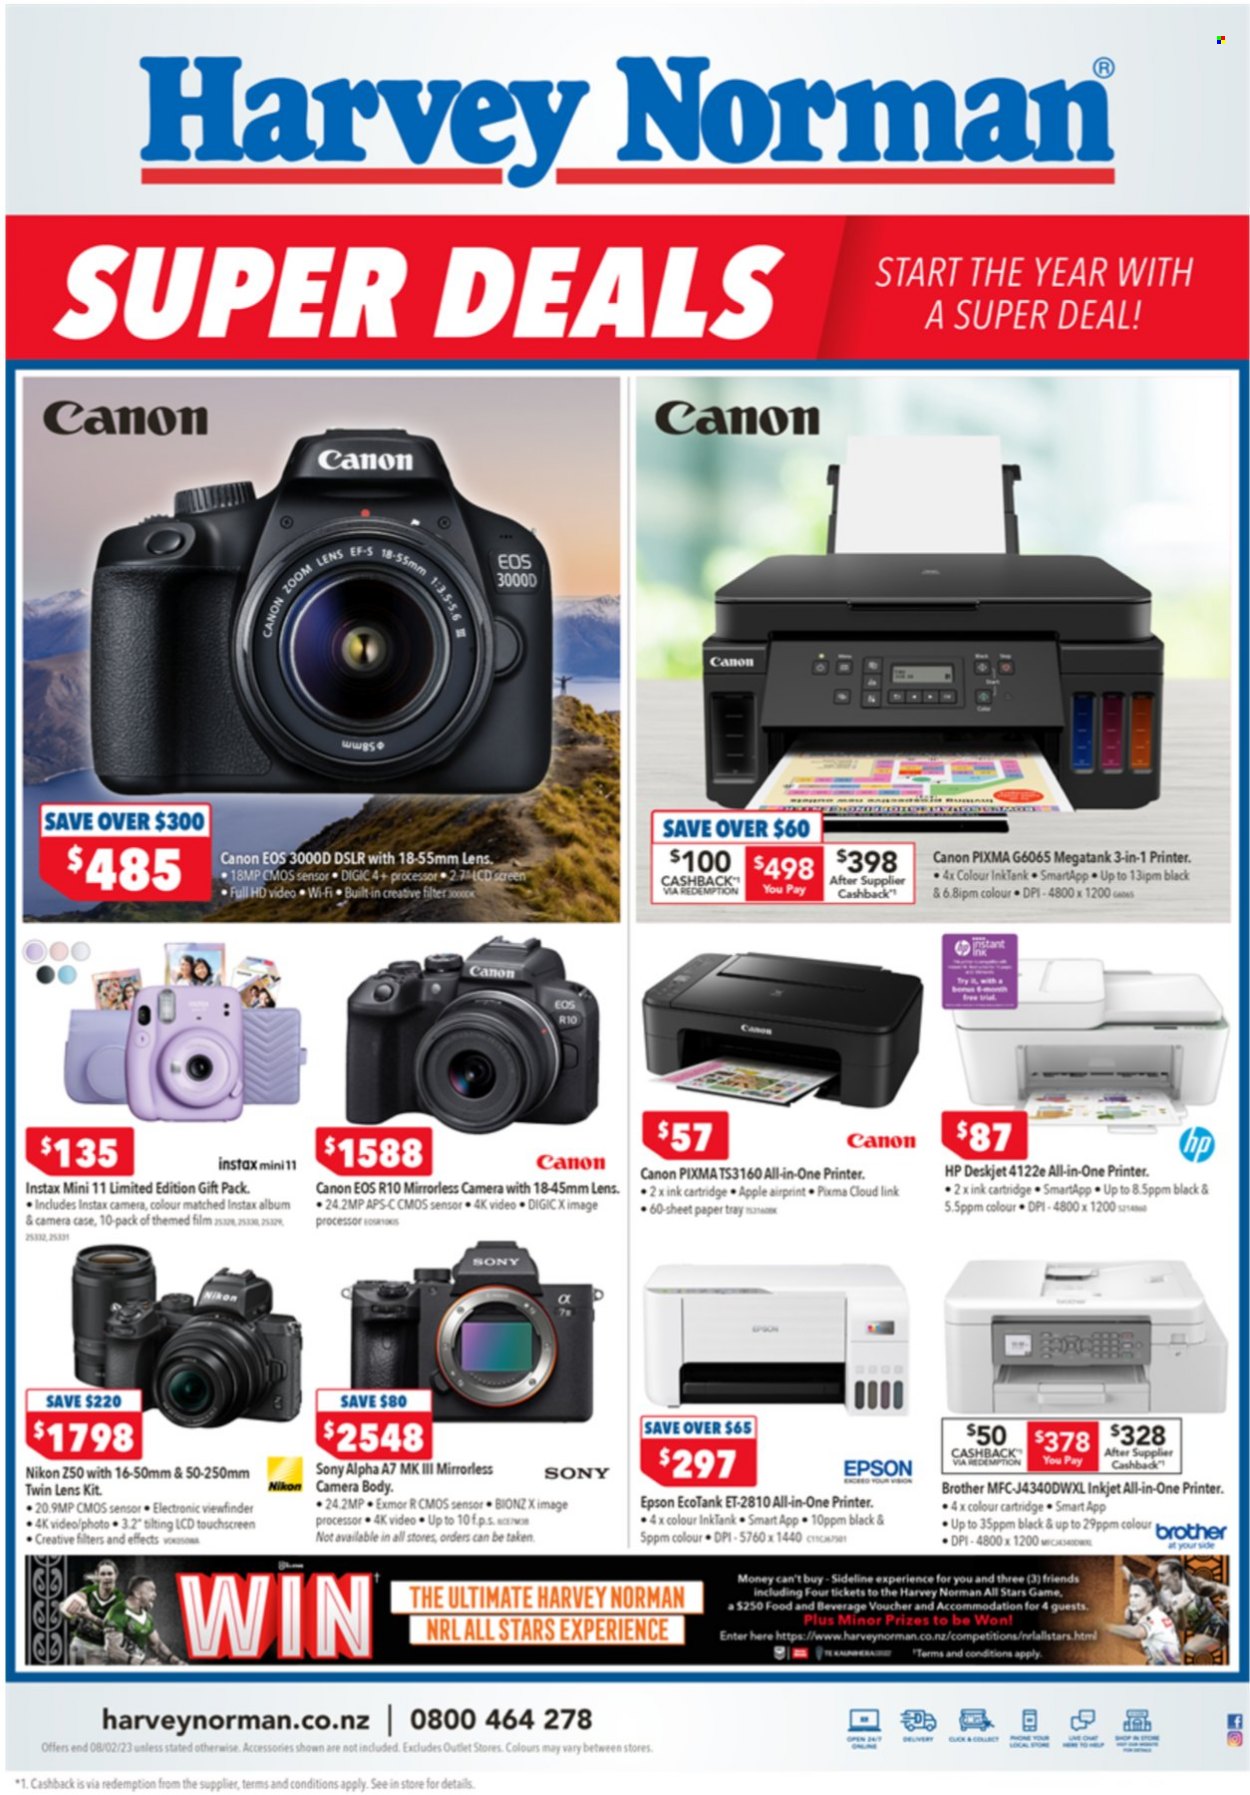 thumbnail - Harvey Norman mailer - 03.02.2023 - 06.02.2023 - Sales products - Sony, Hewlett Packard, Brother, Canon, lens, mirrorless camera, Nikon, camera, Epson, all-in-one printer, printer, HP DeskJet. Page 1.